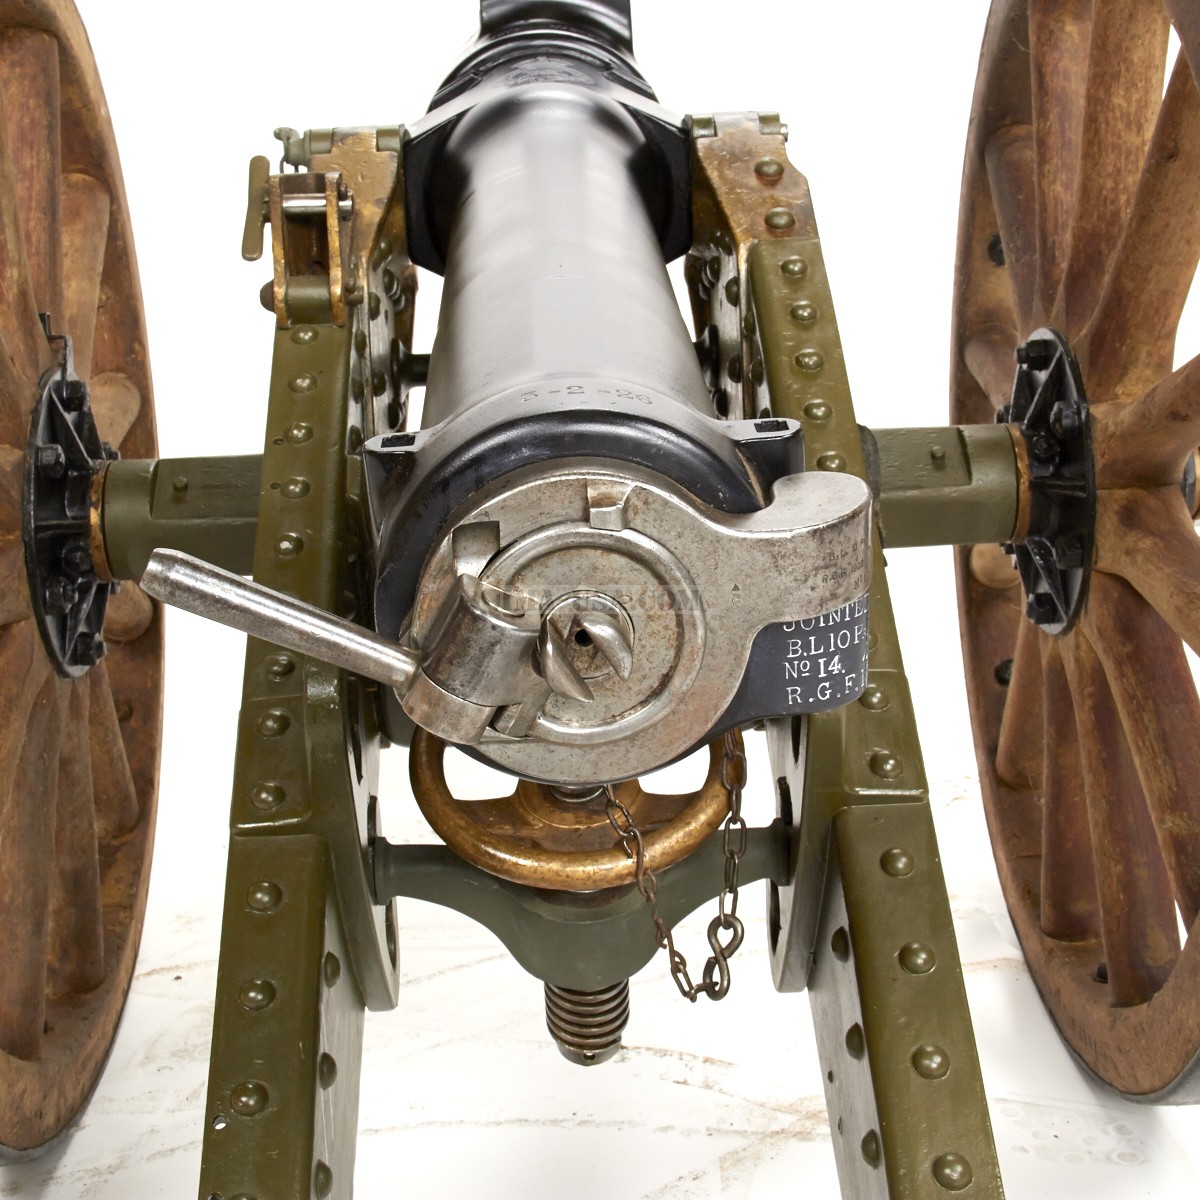 RML 7 Inch Gun Pics, Weapons Collection